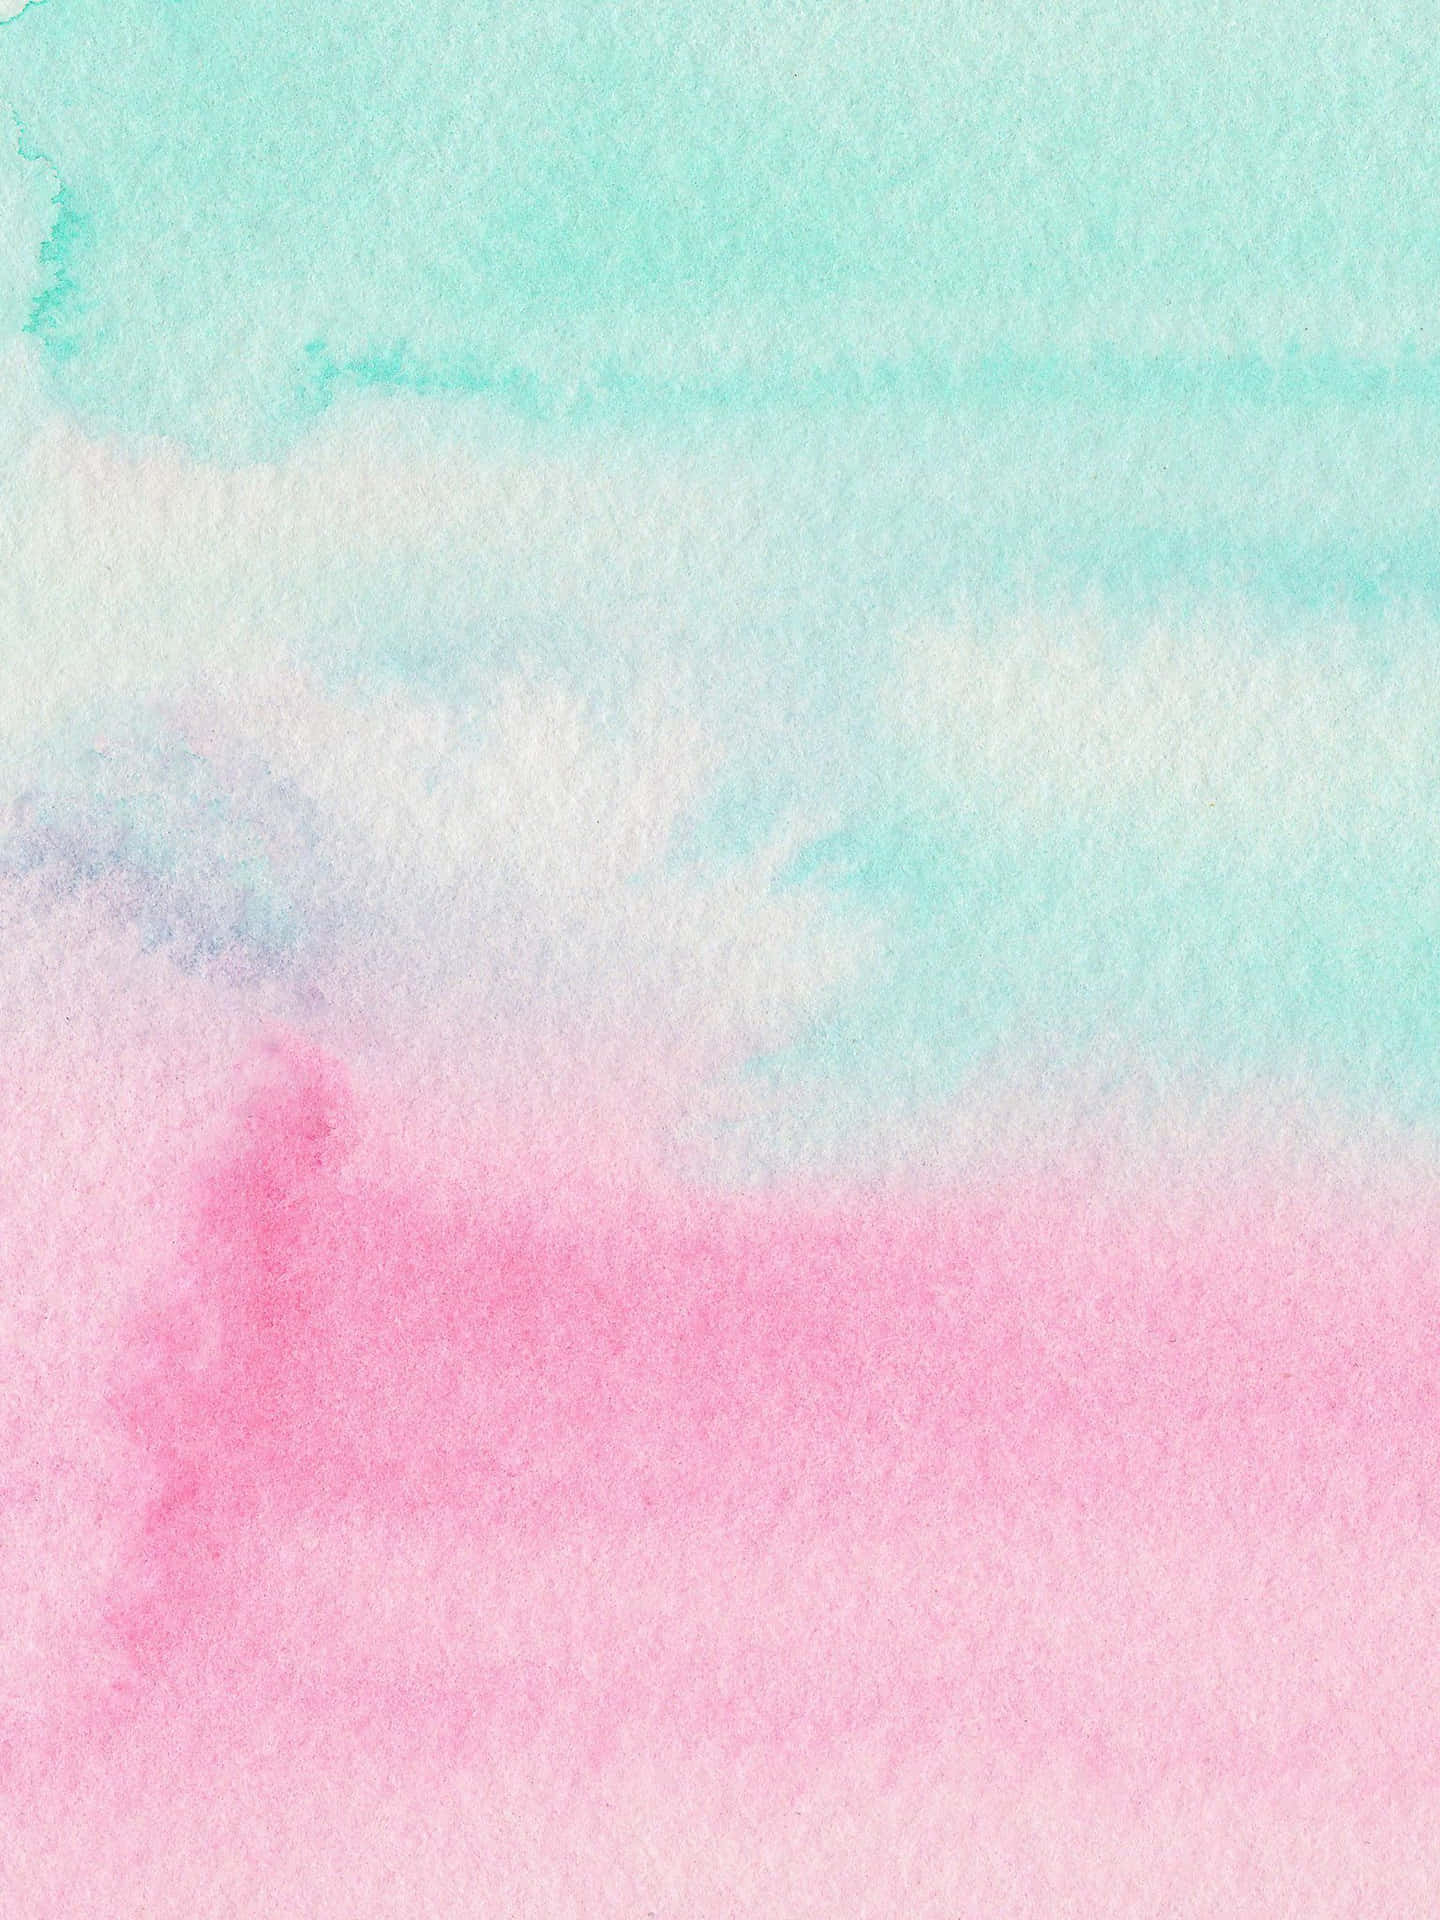 A Soft, Colorful Ombre Effect Wallpaper